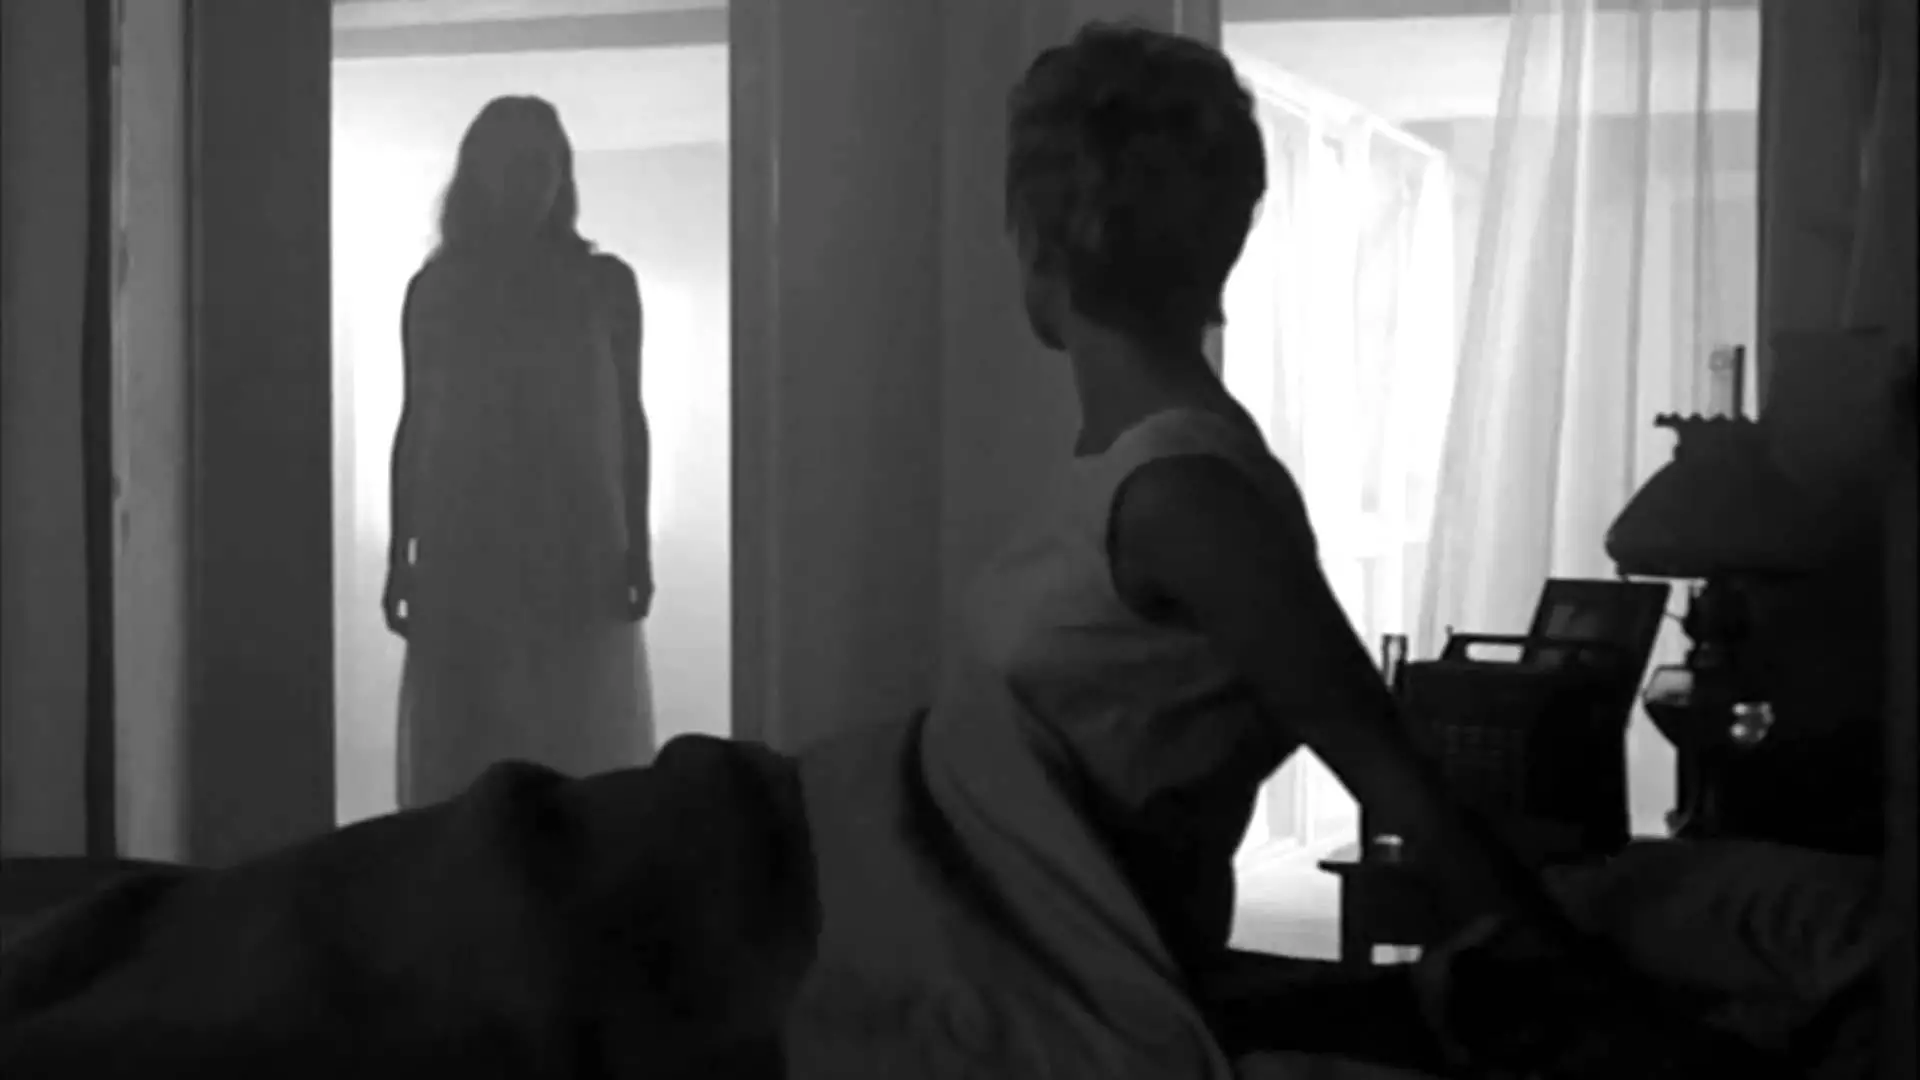 a woman sits upright in bed and sees a female figure looming in her bedroom doorway